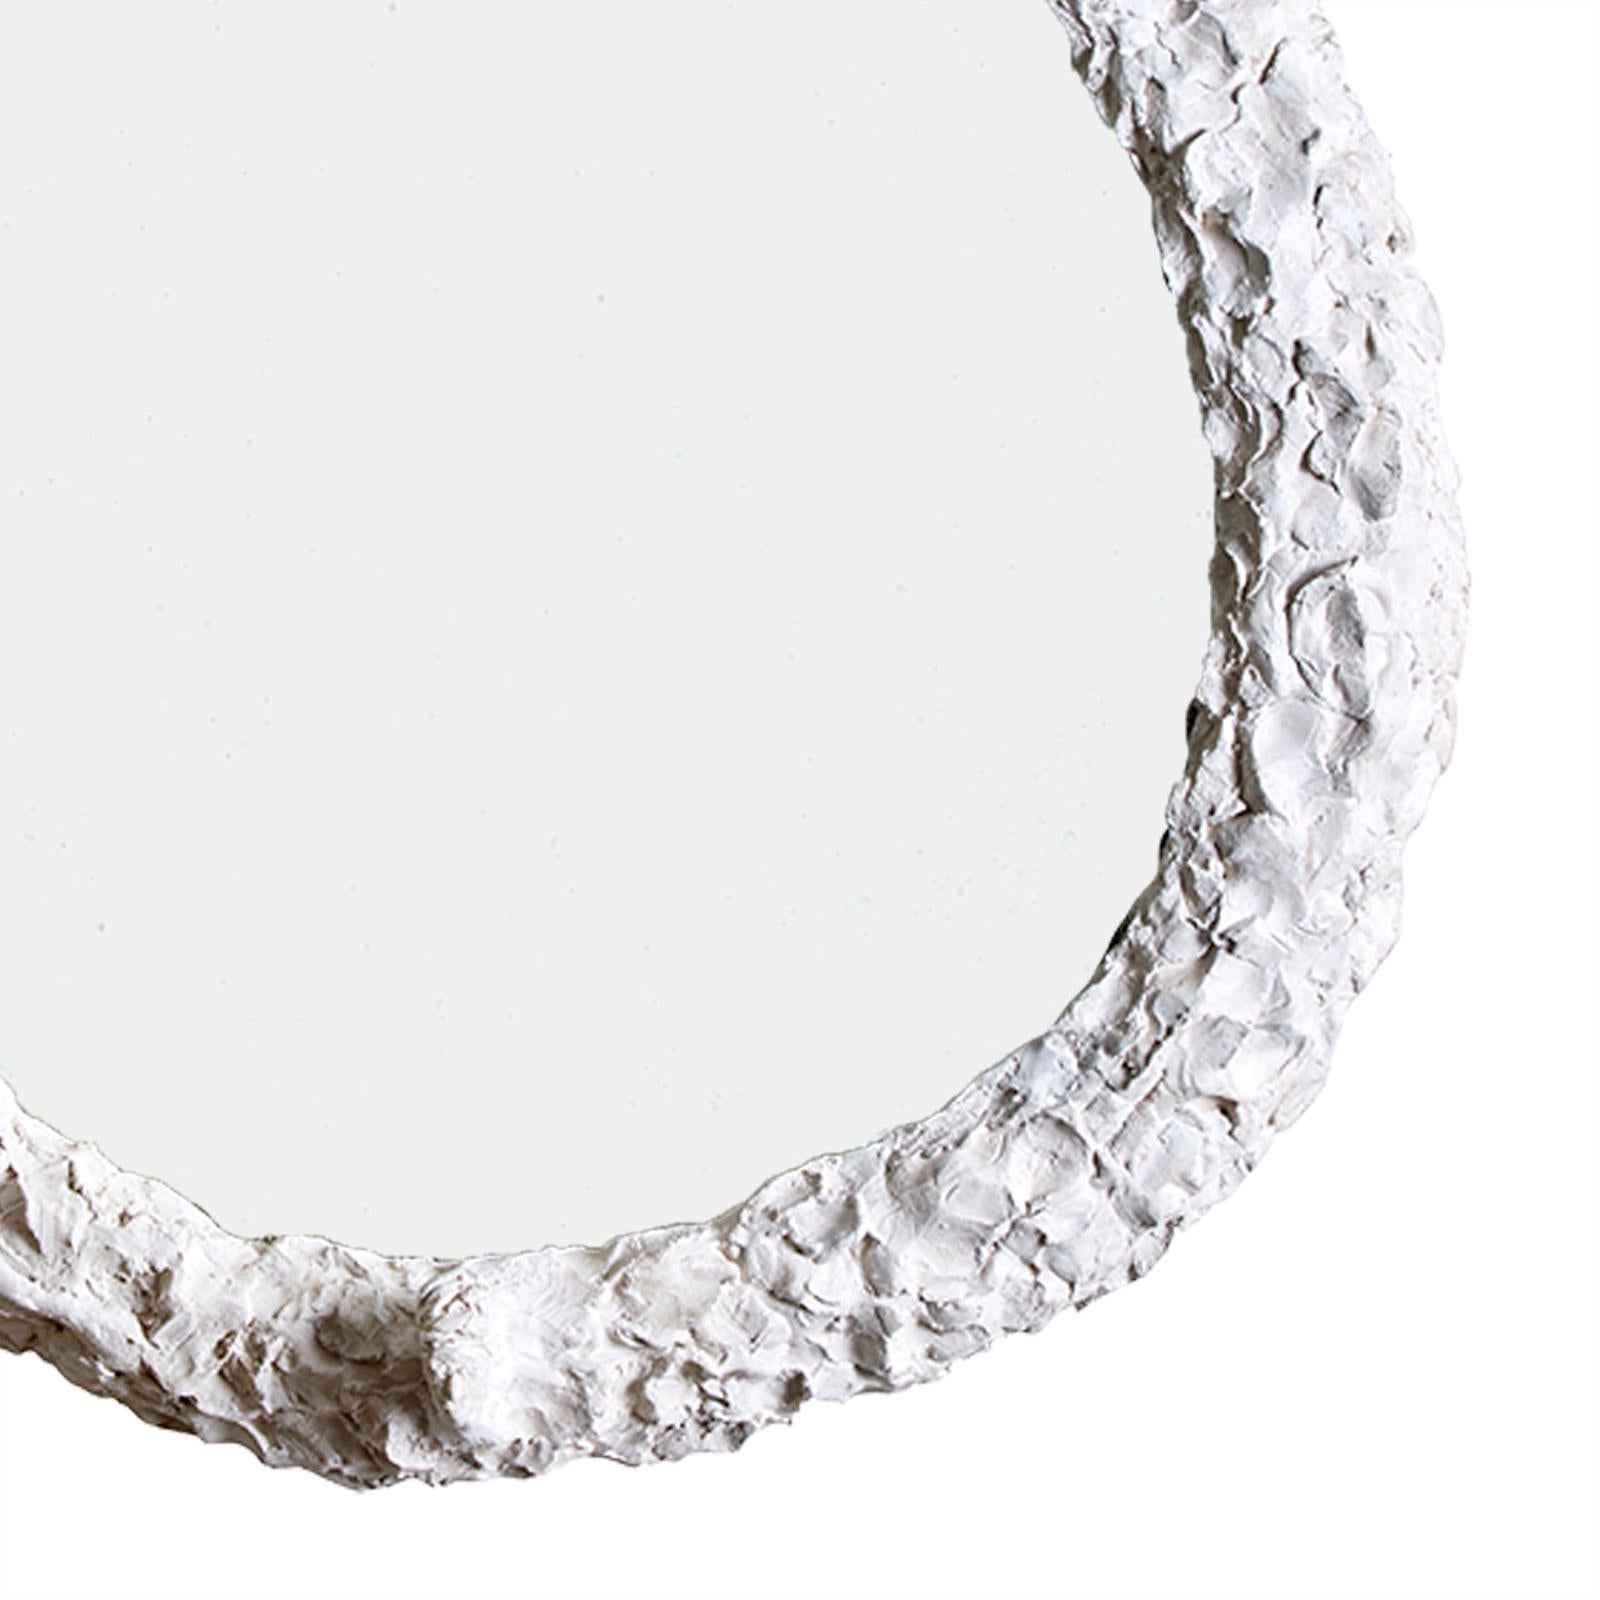 Margit Wittig's classical yet curious mirrors are filled with individuality.
With her artistic eye, Margit’s hand-sculpted, textural frames have a signature portrait head placed at the lowest point.
Each mirror is cast, applying multiple layers of